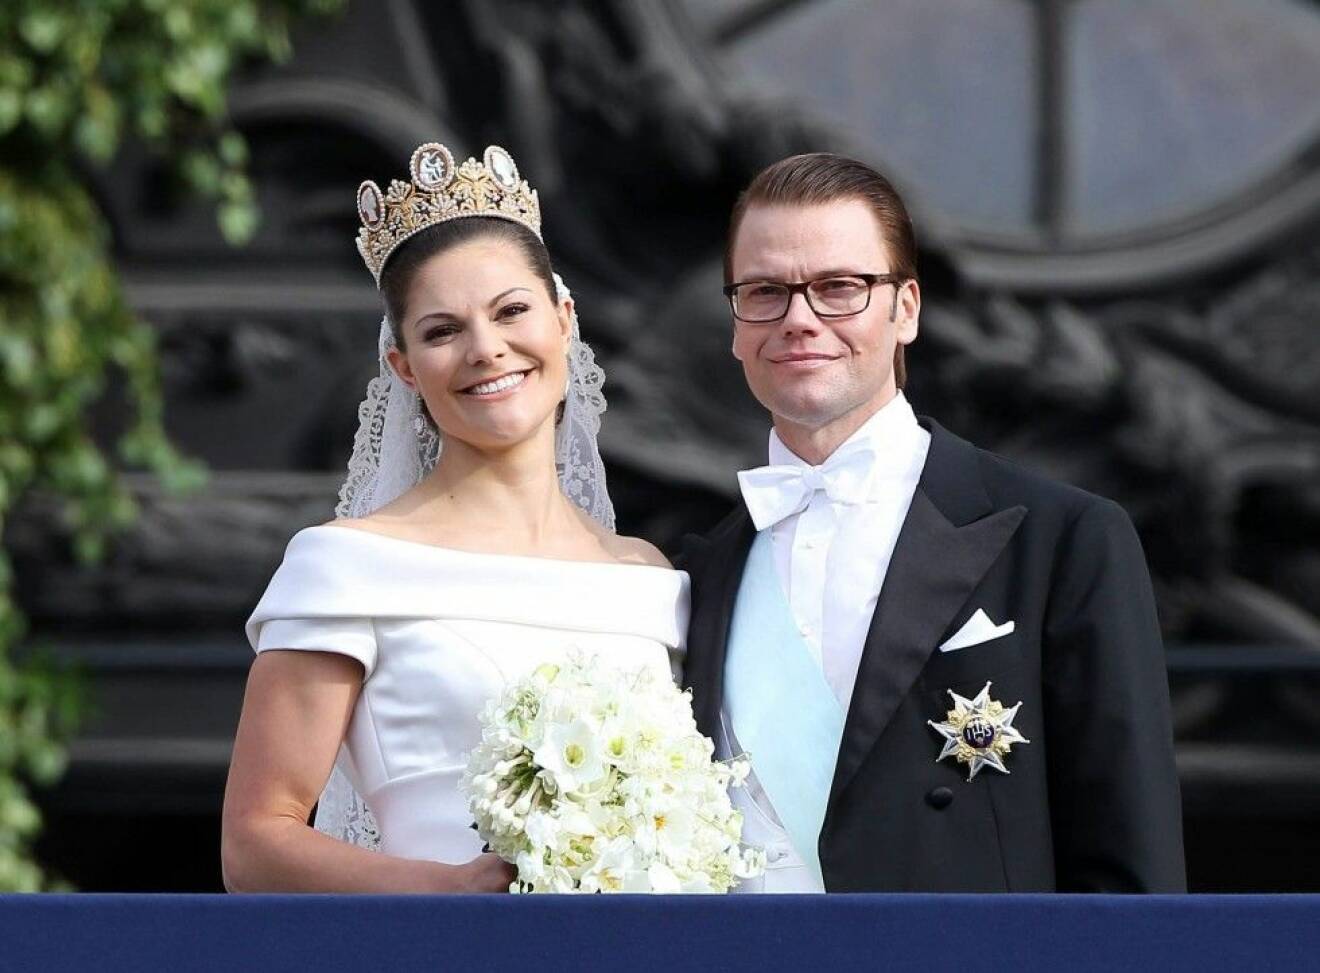 Crown Princess Victoria and Daniel westling's wedding at Royal Palace in Stockholm.